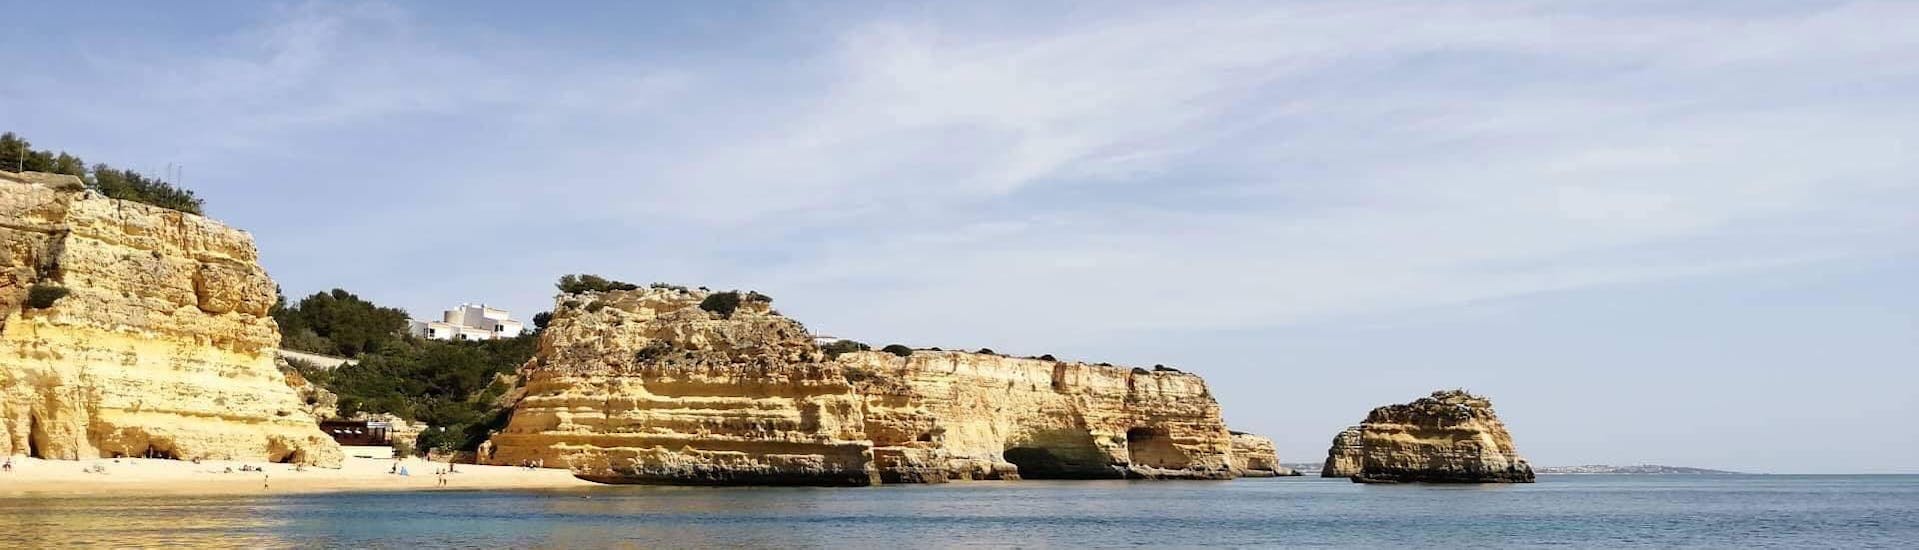 During their Private Sunset Boat Trip from Portimão with Royal Nautic Portimão, the tour participants enjoy the incomparable view of the rock formations in the sea.